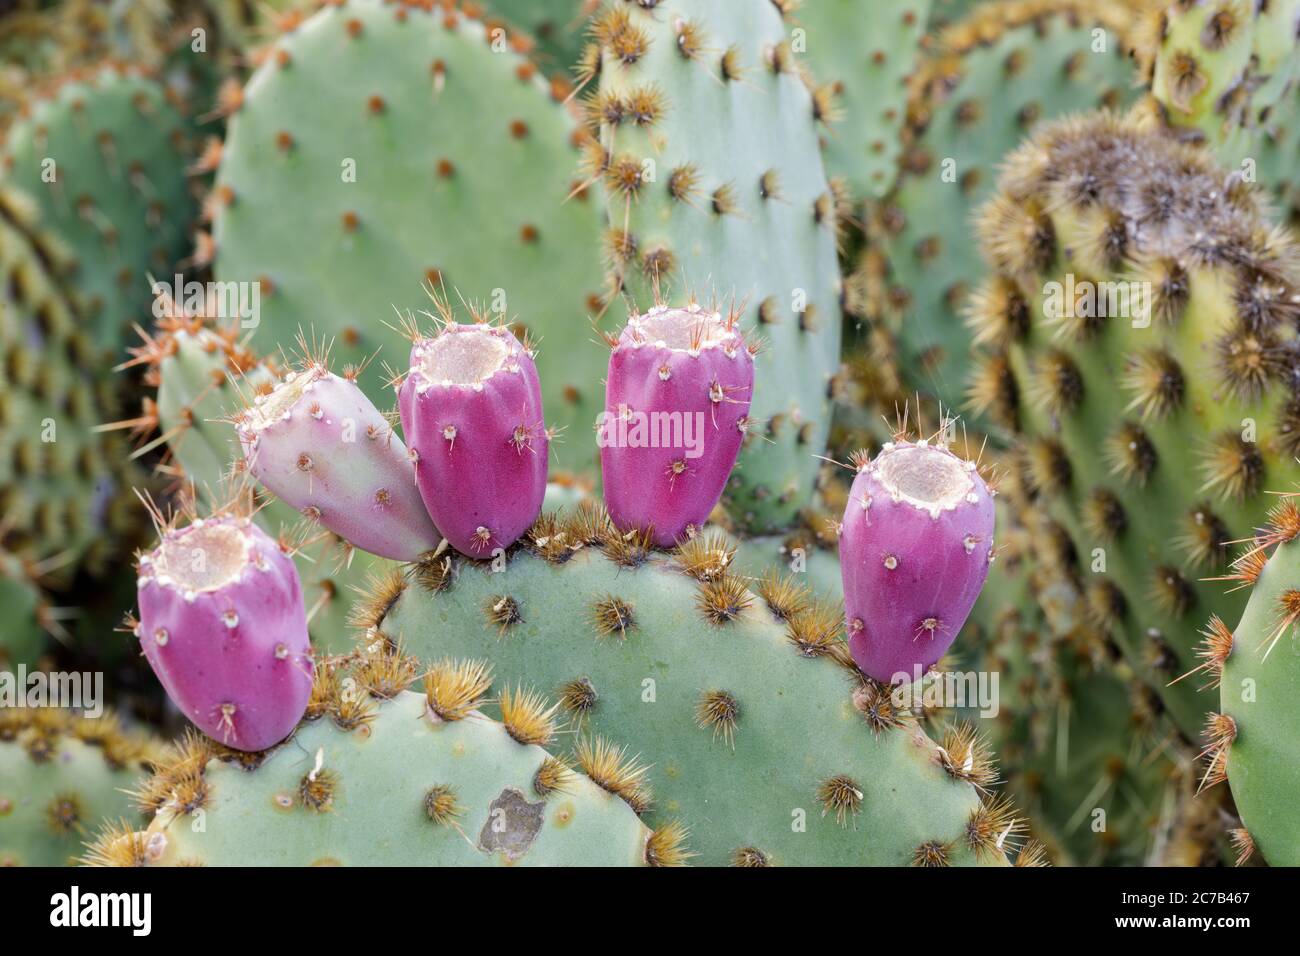 Prickly Pear Cactus with Fruits at the Arizona Cactus Garden Stock Photo